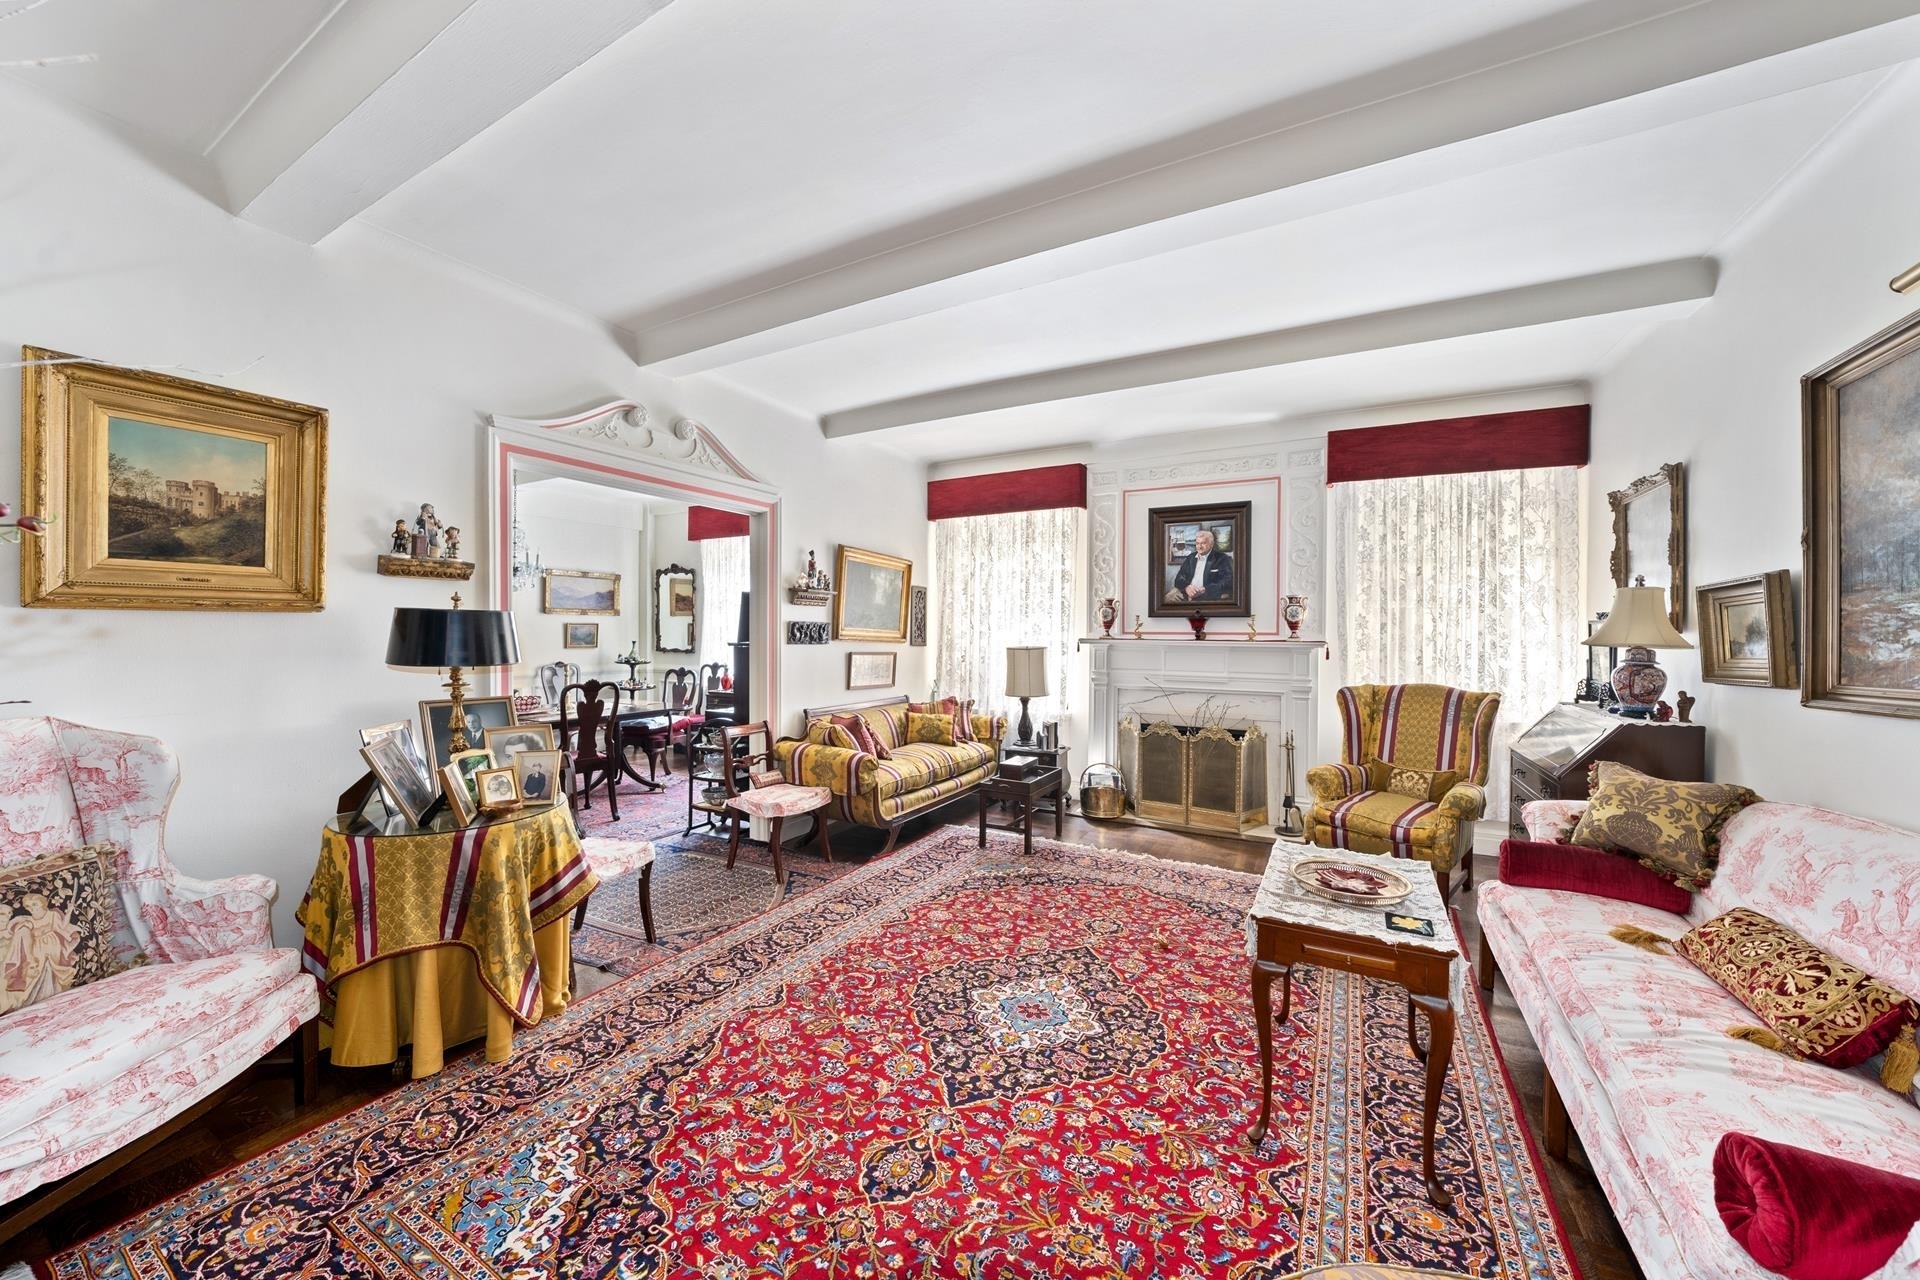 Co-op Properties for Sale at 112 E 74TH ST, 3S Lenox Hill, New York, New York 10021